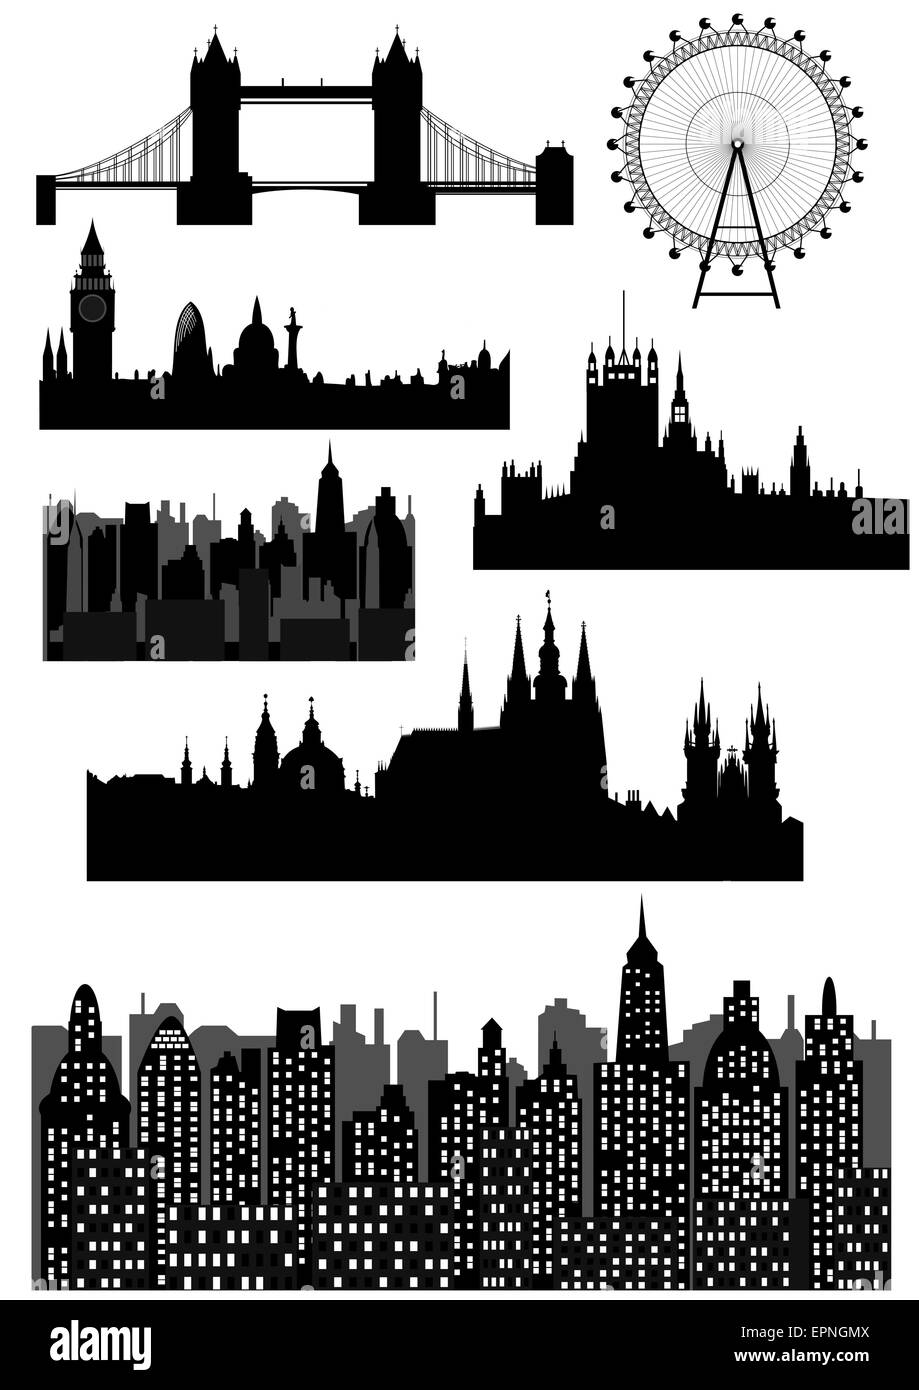 architectural monuments and landmarks - London, Prague and modern city Stock Vector